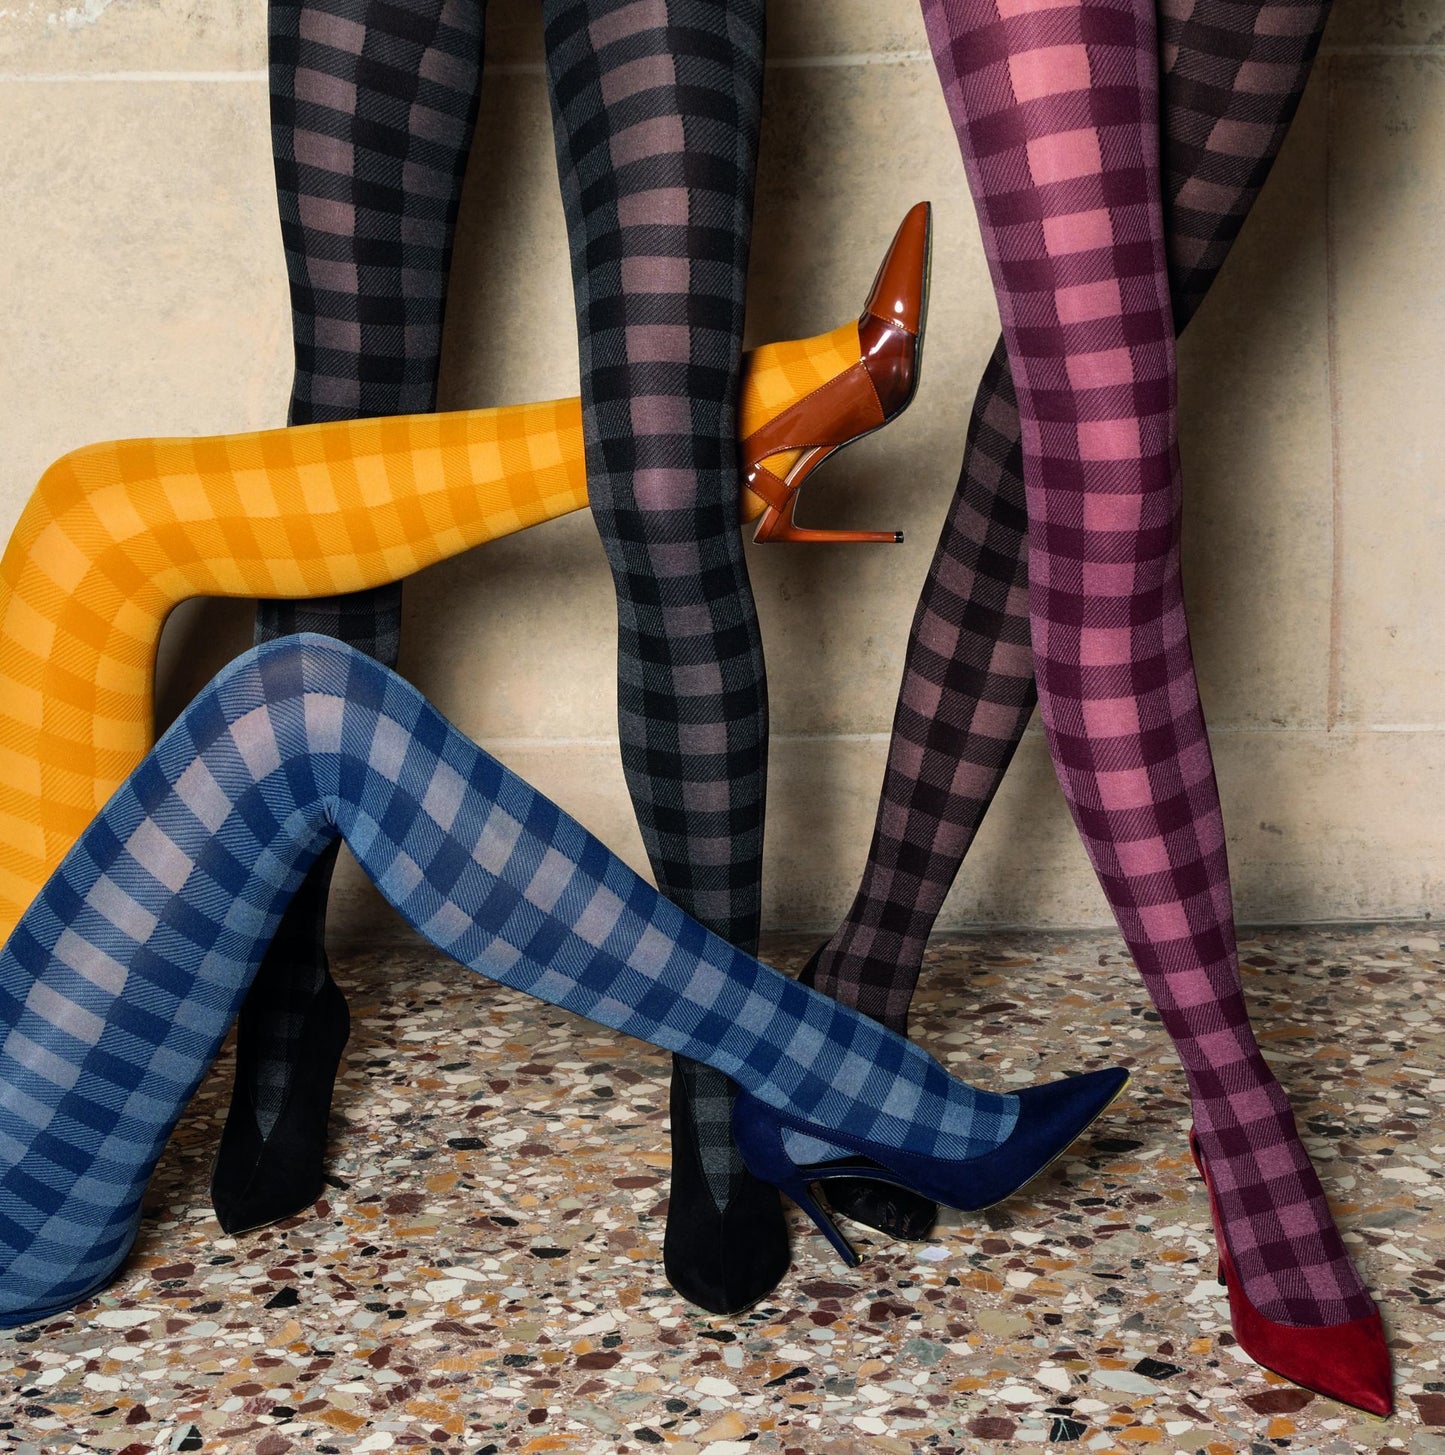 Trasparenze Vachiria Collant - Soft opaque fashion tights with a two tone square gingham style pattern. Available in mustard, blue/navy and grey/black